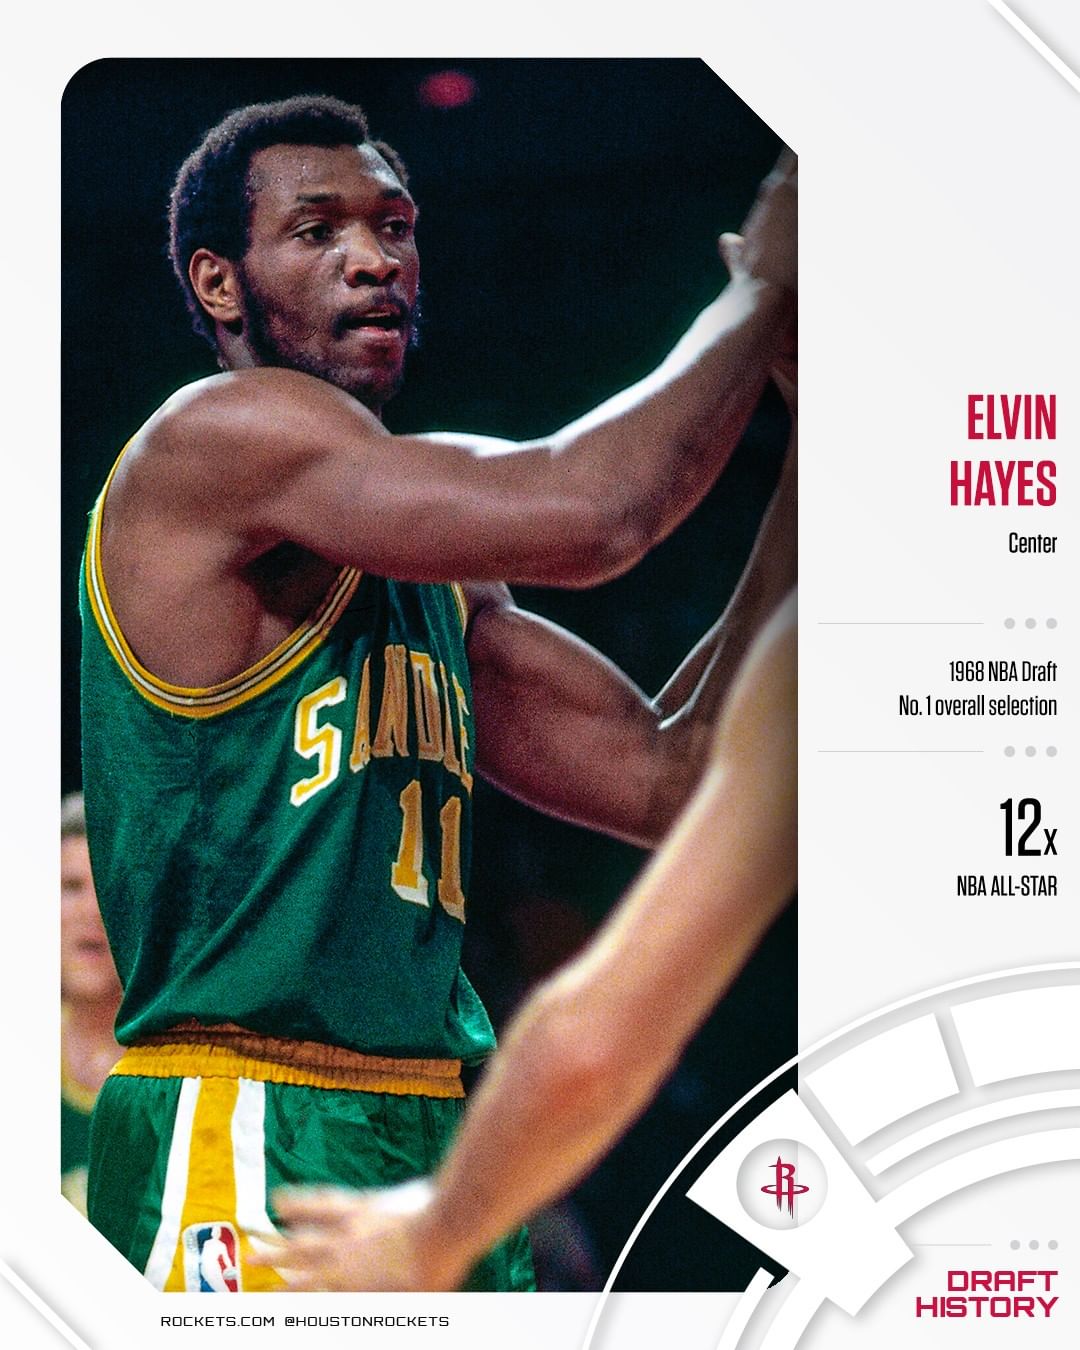 On this day in 1968 the San Diego Rockets drafted Elvin "The Big E" Hayes out of...